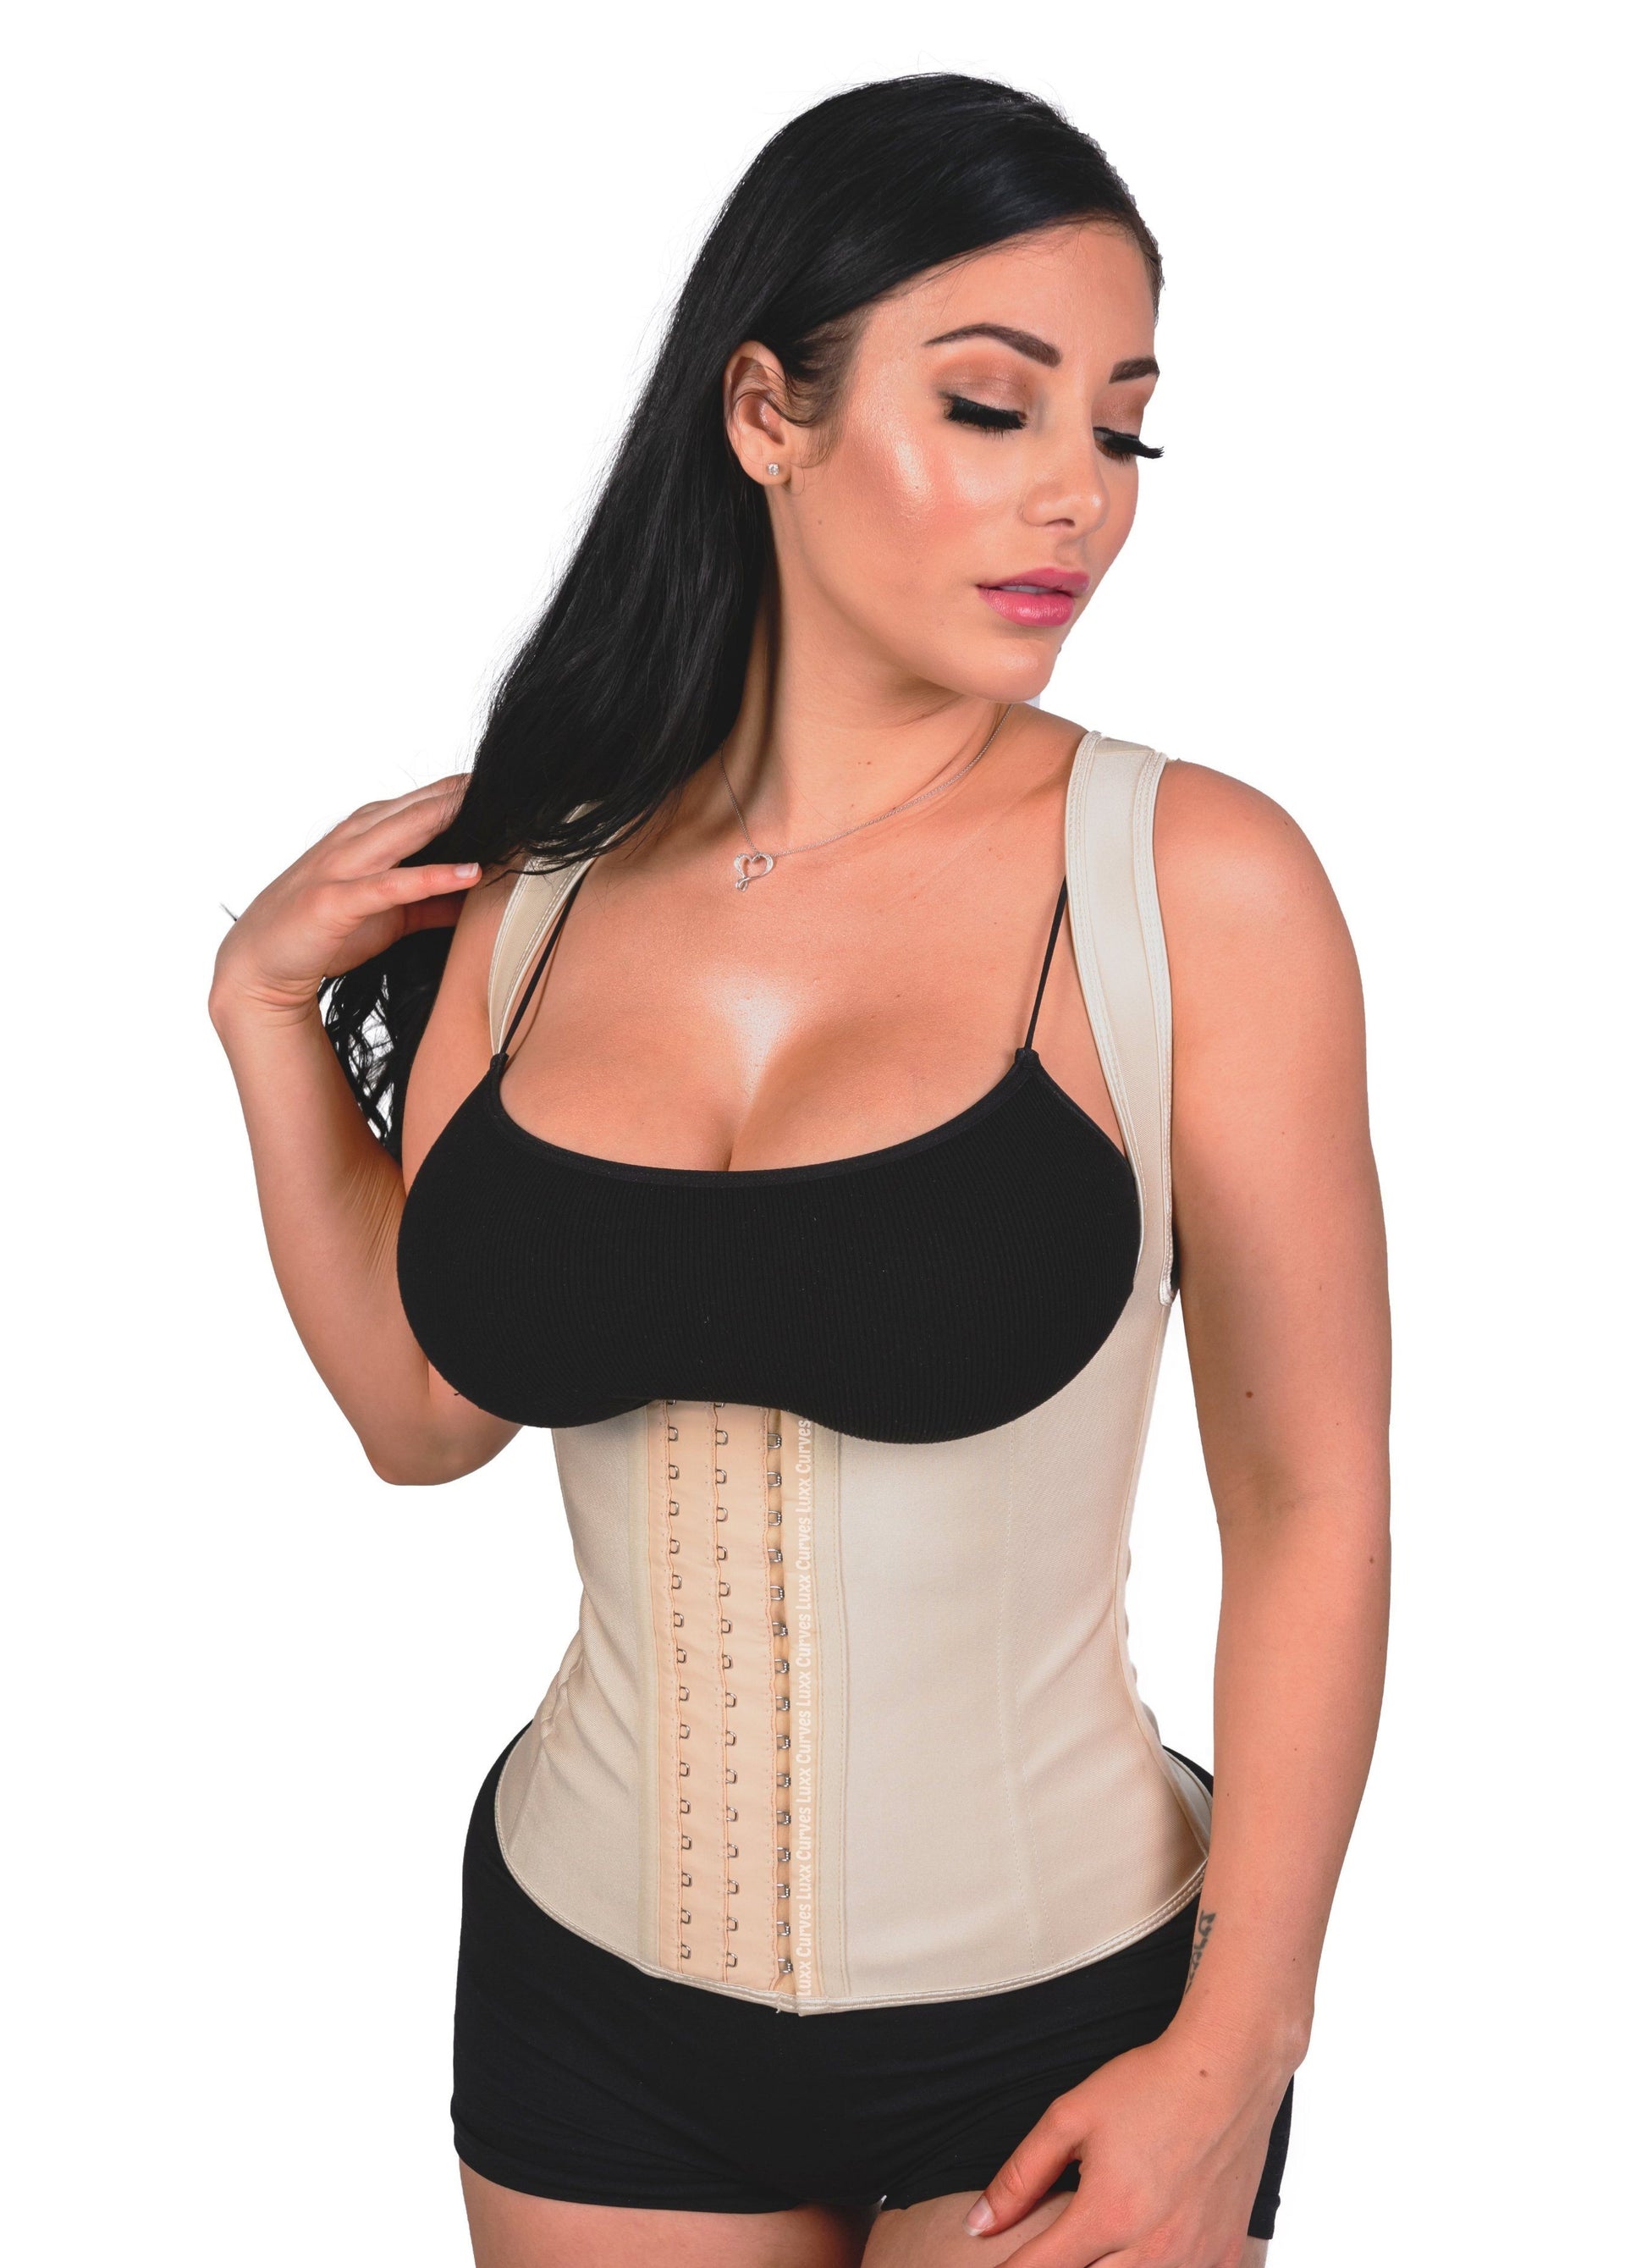 Customer reviews: Luxx Curves Waist Trainer Corsets for